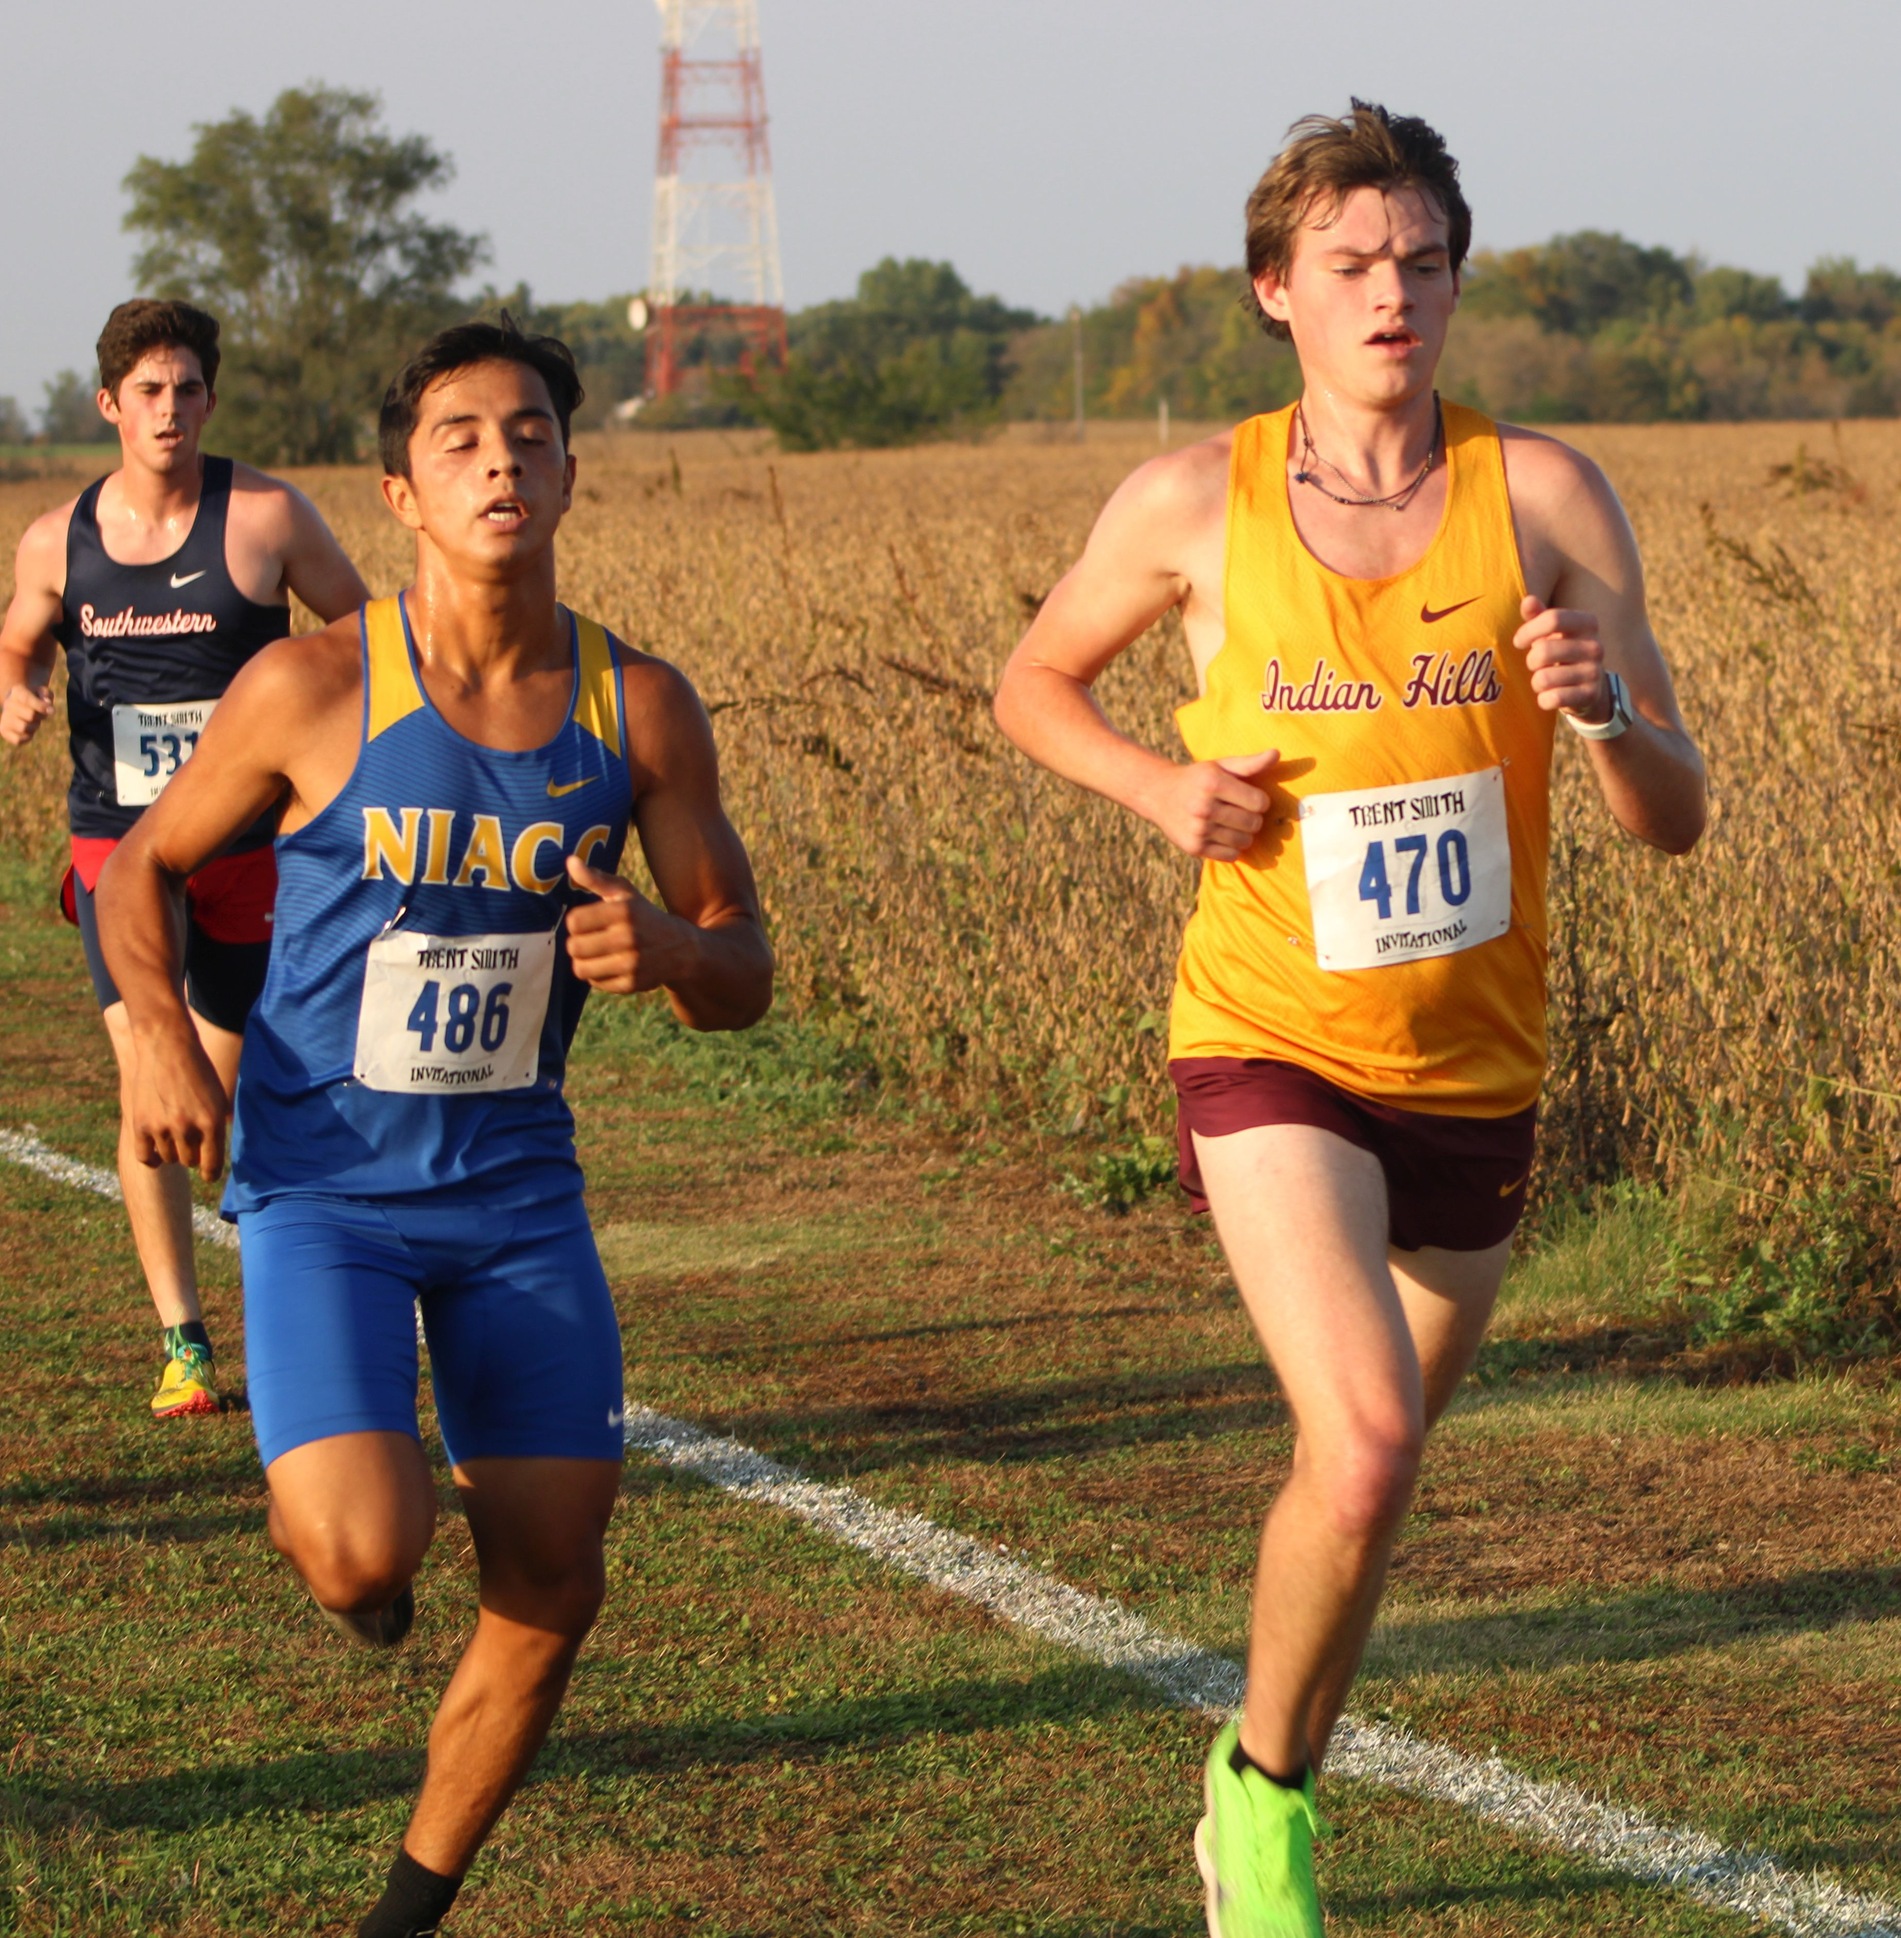 NIACC's Christian Rodriguez runs at the Trent Smith Invite earlier this season on the NIACC campus.